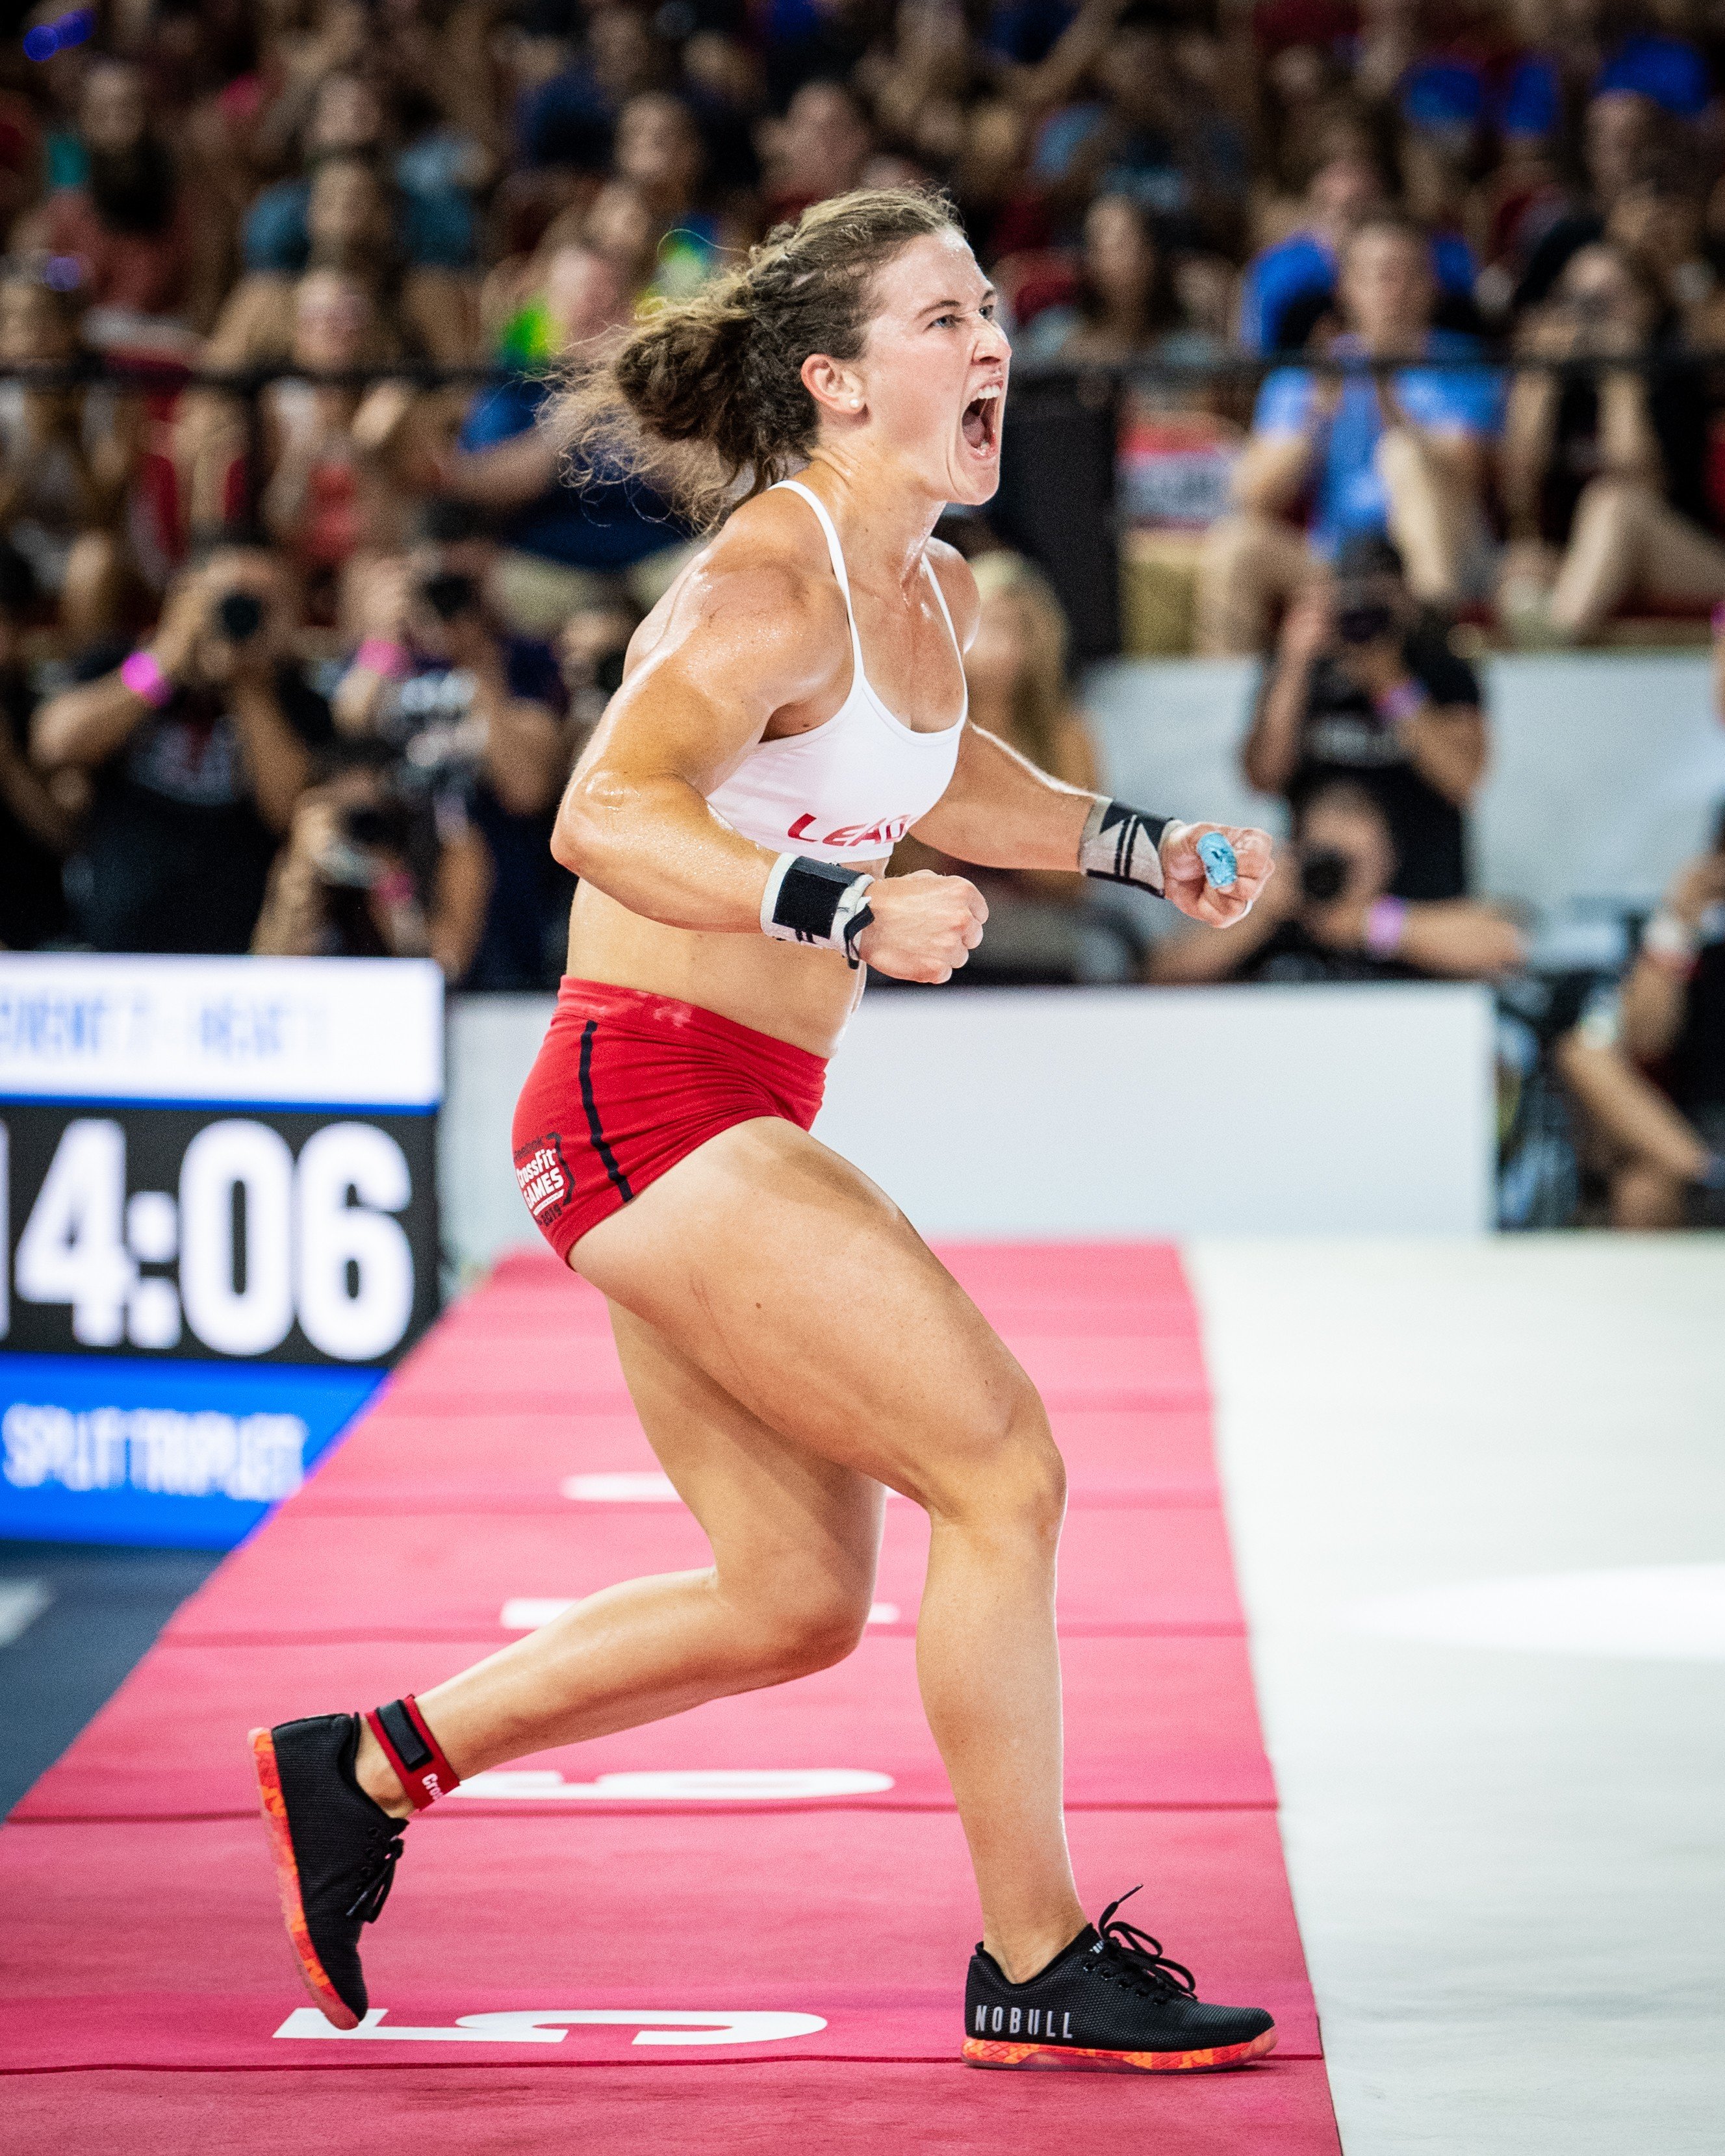 CrossFit Games 2019: Tia-Clair Toomey wins record third on Earth' title | South China Morning Post